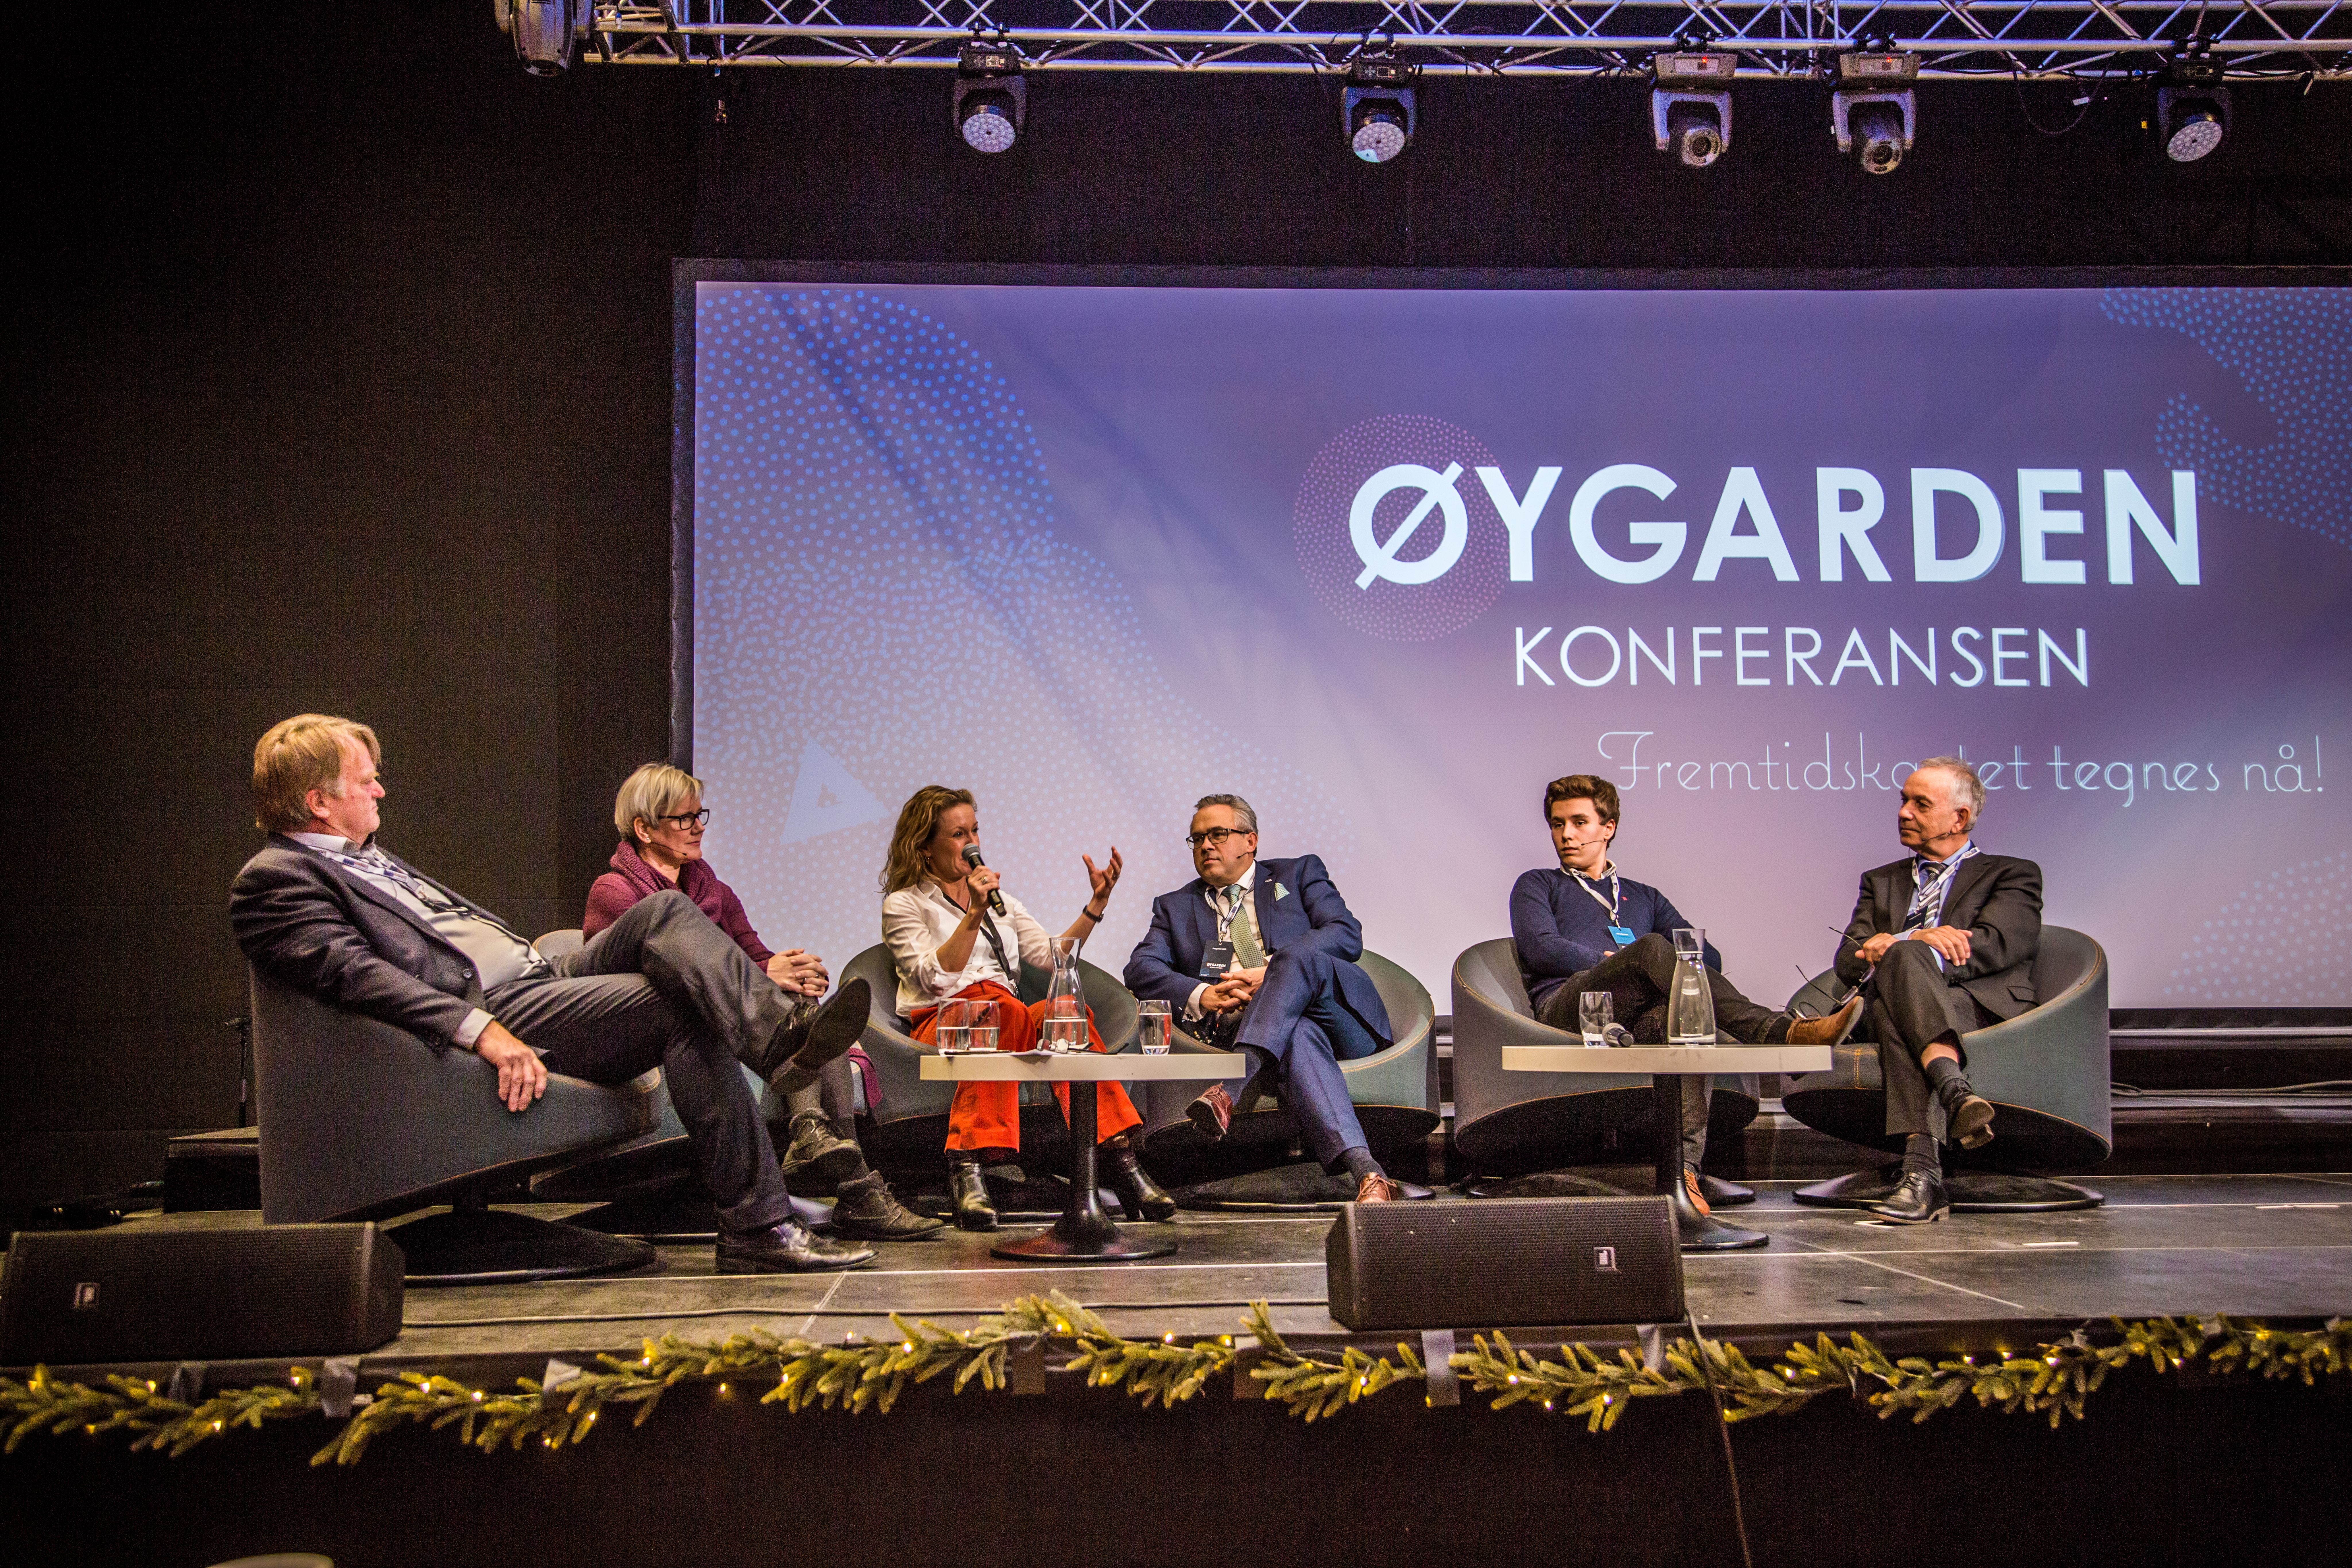 The picture shows the debate at the Øygard Conference